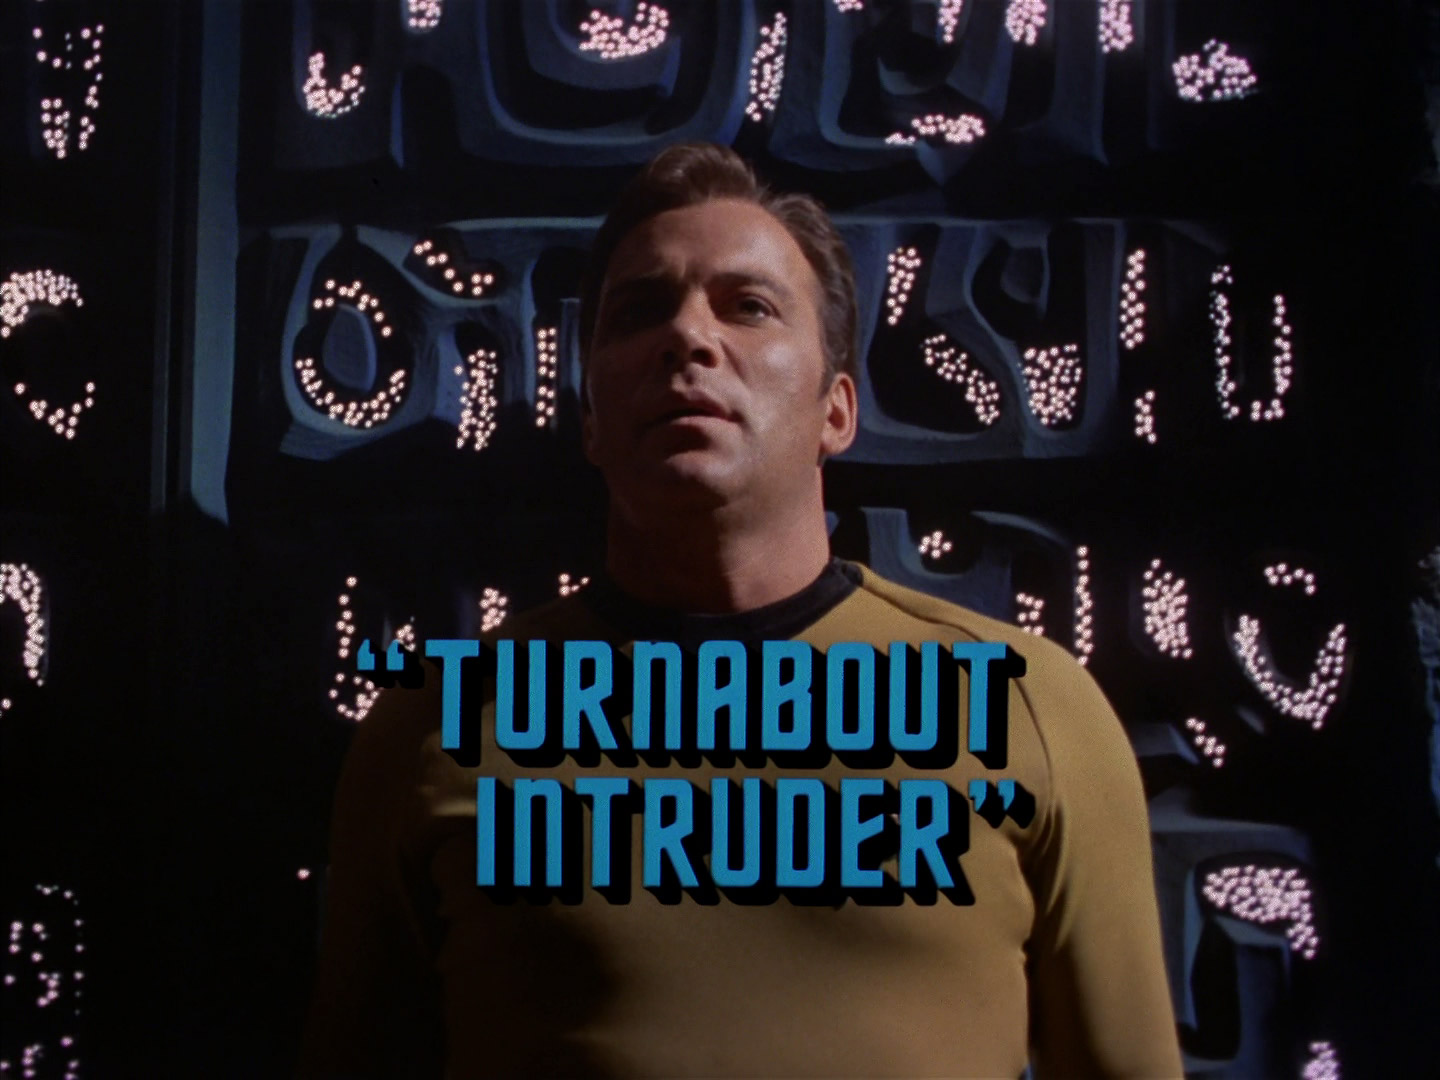 https://tos.trekcore.com/gallery/albums/screencaps/season3/324-turnabout-intruder/turnabout-intruder-br-071.jpg